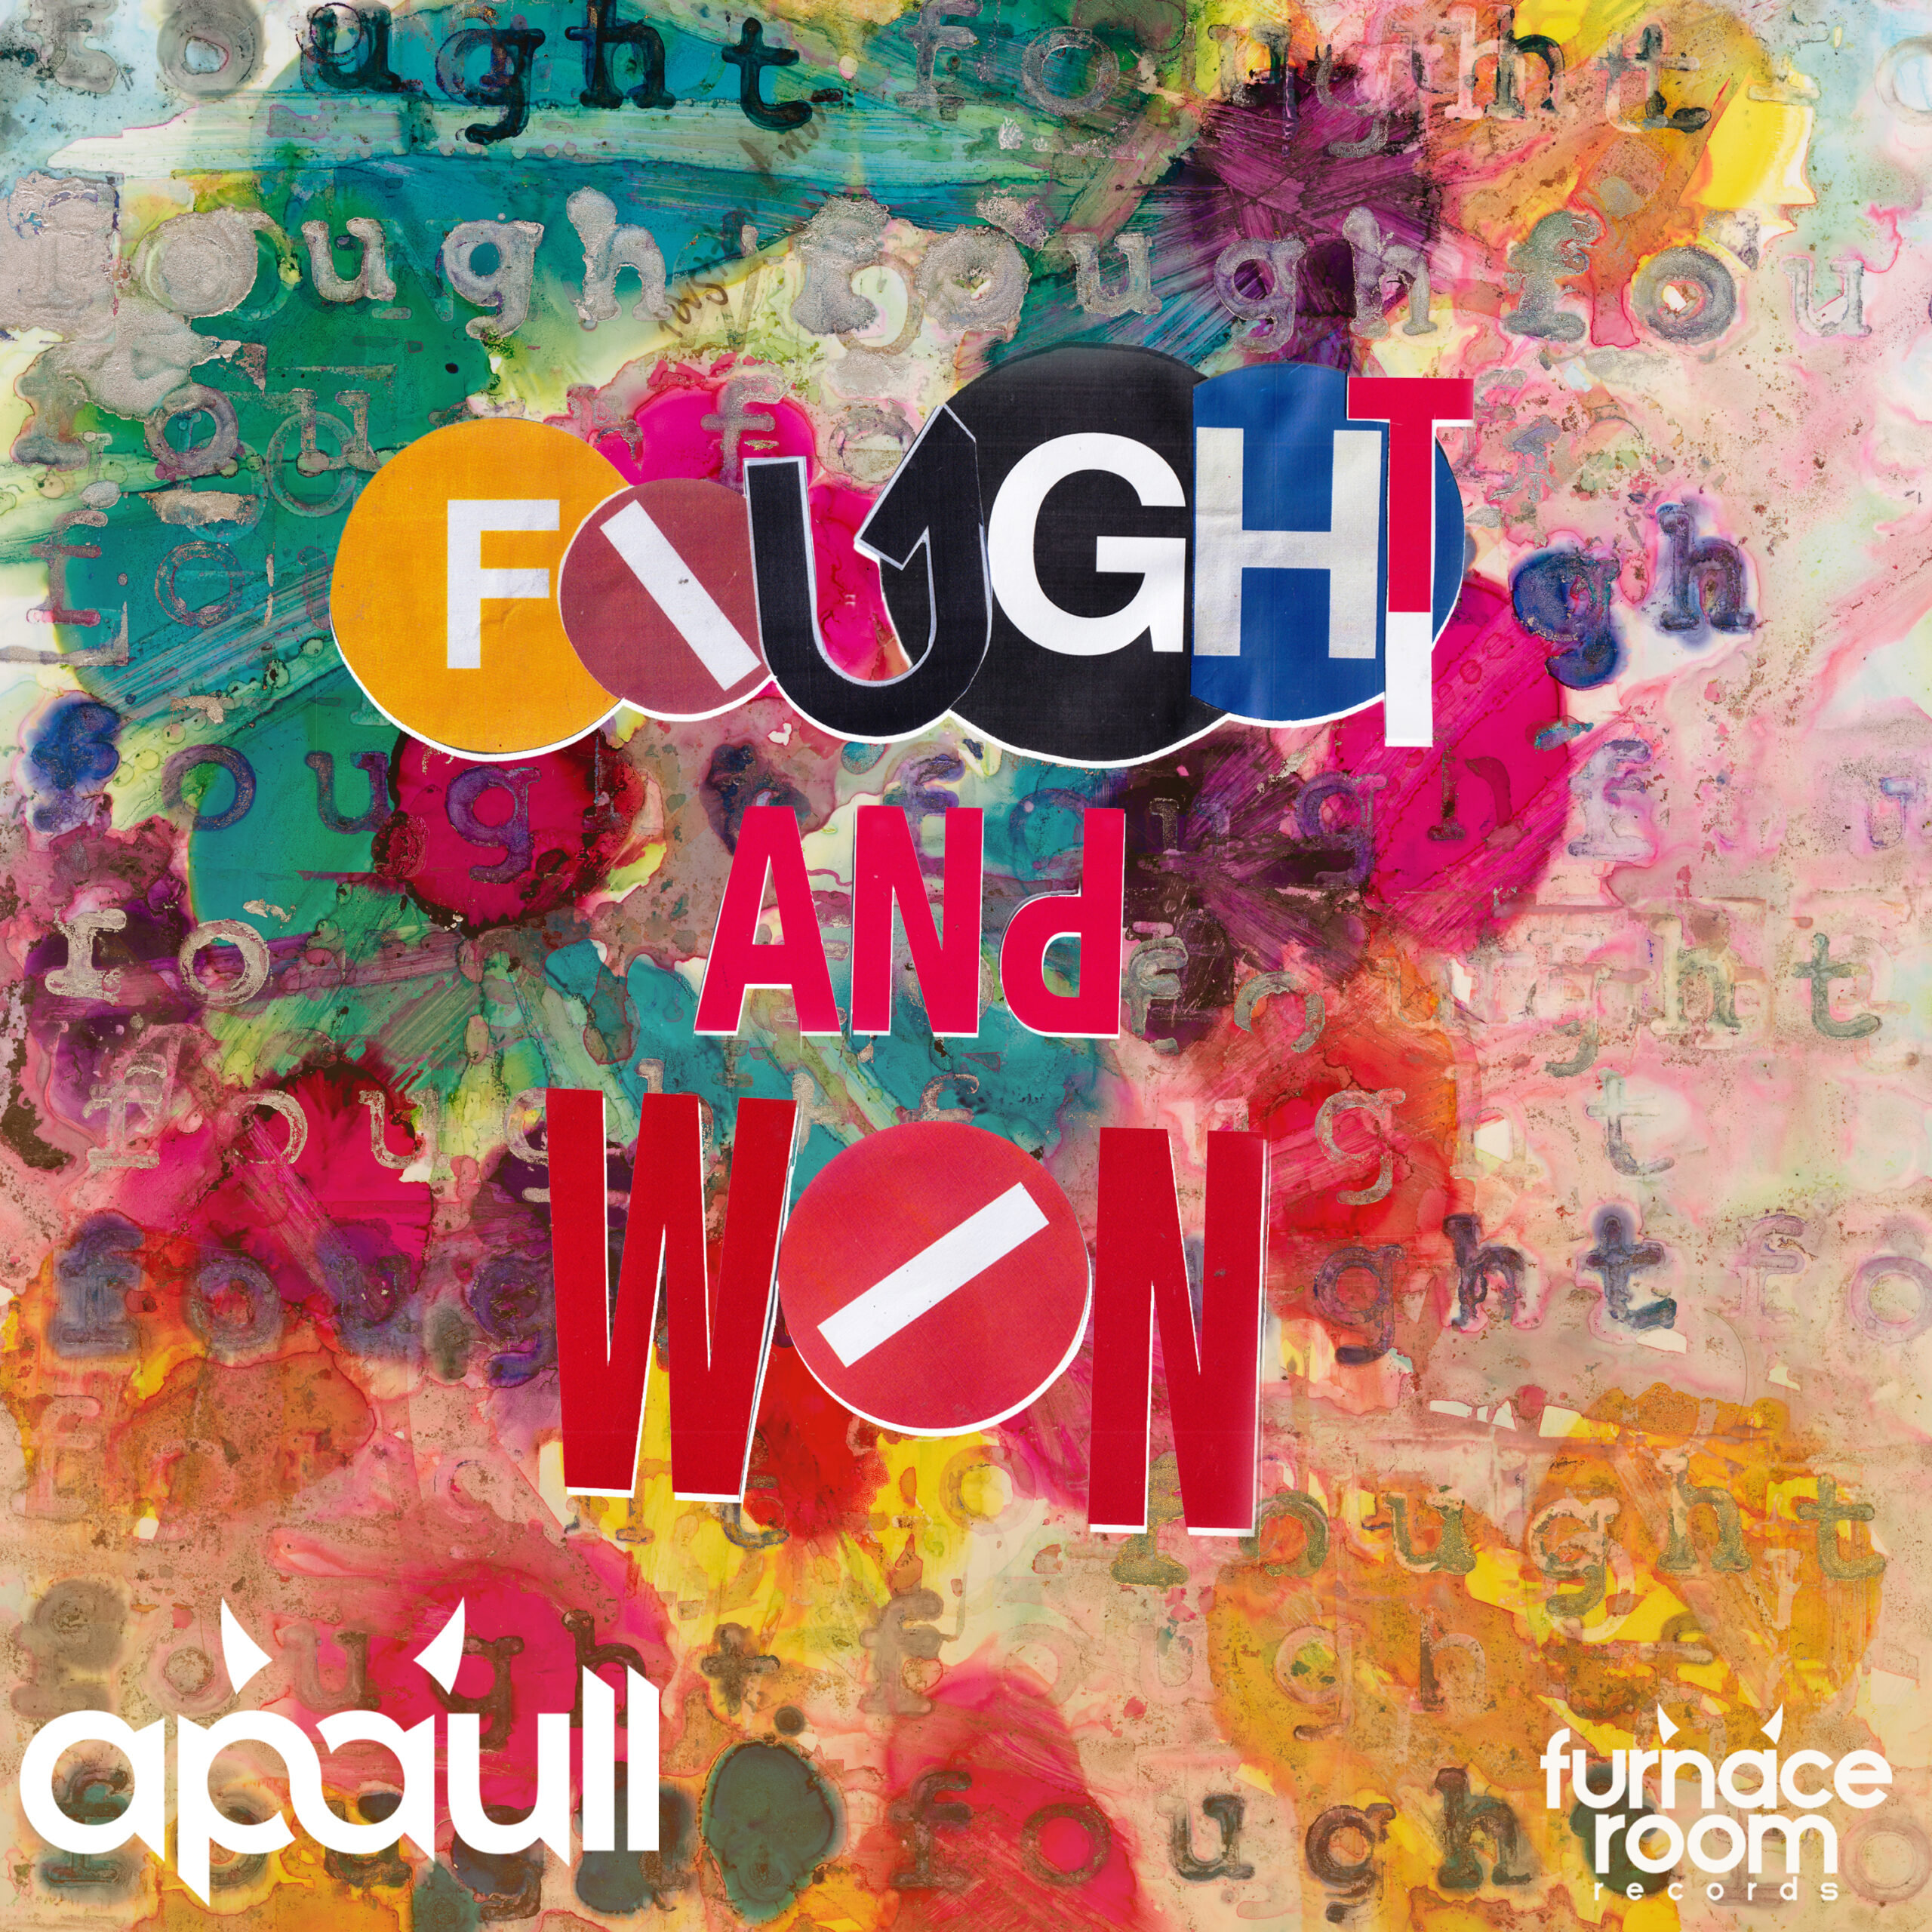 Apaull - Fought & Won [Furnace Room Records]